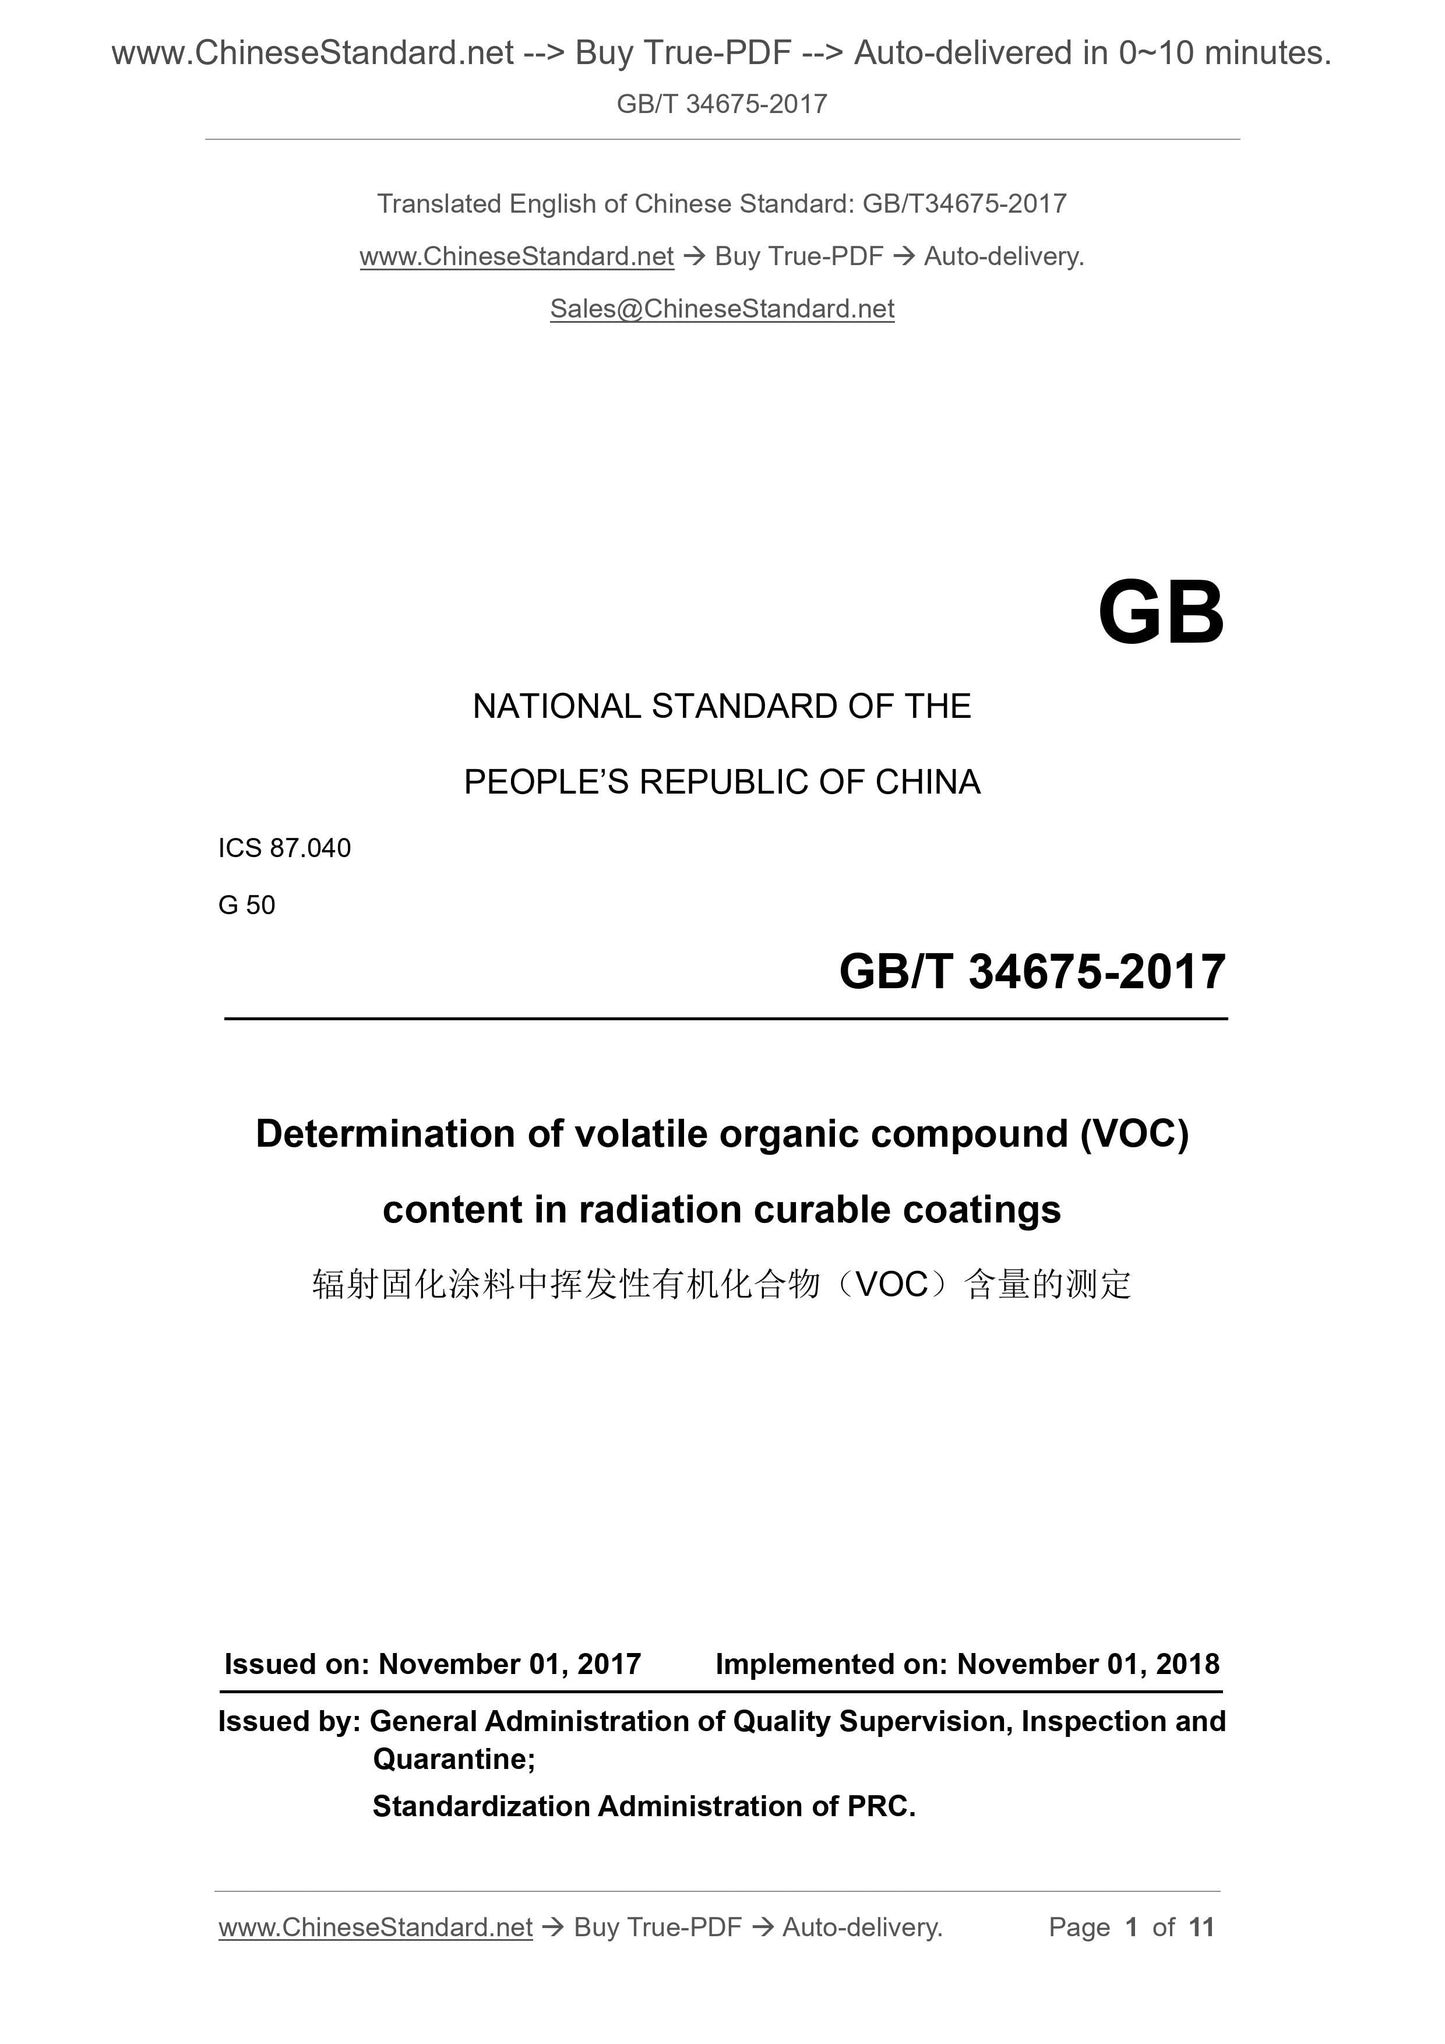 GB/T 34675-2017 Page 1